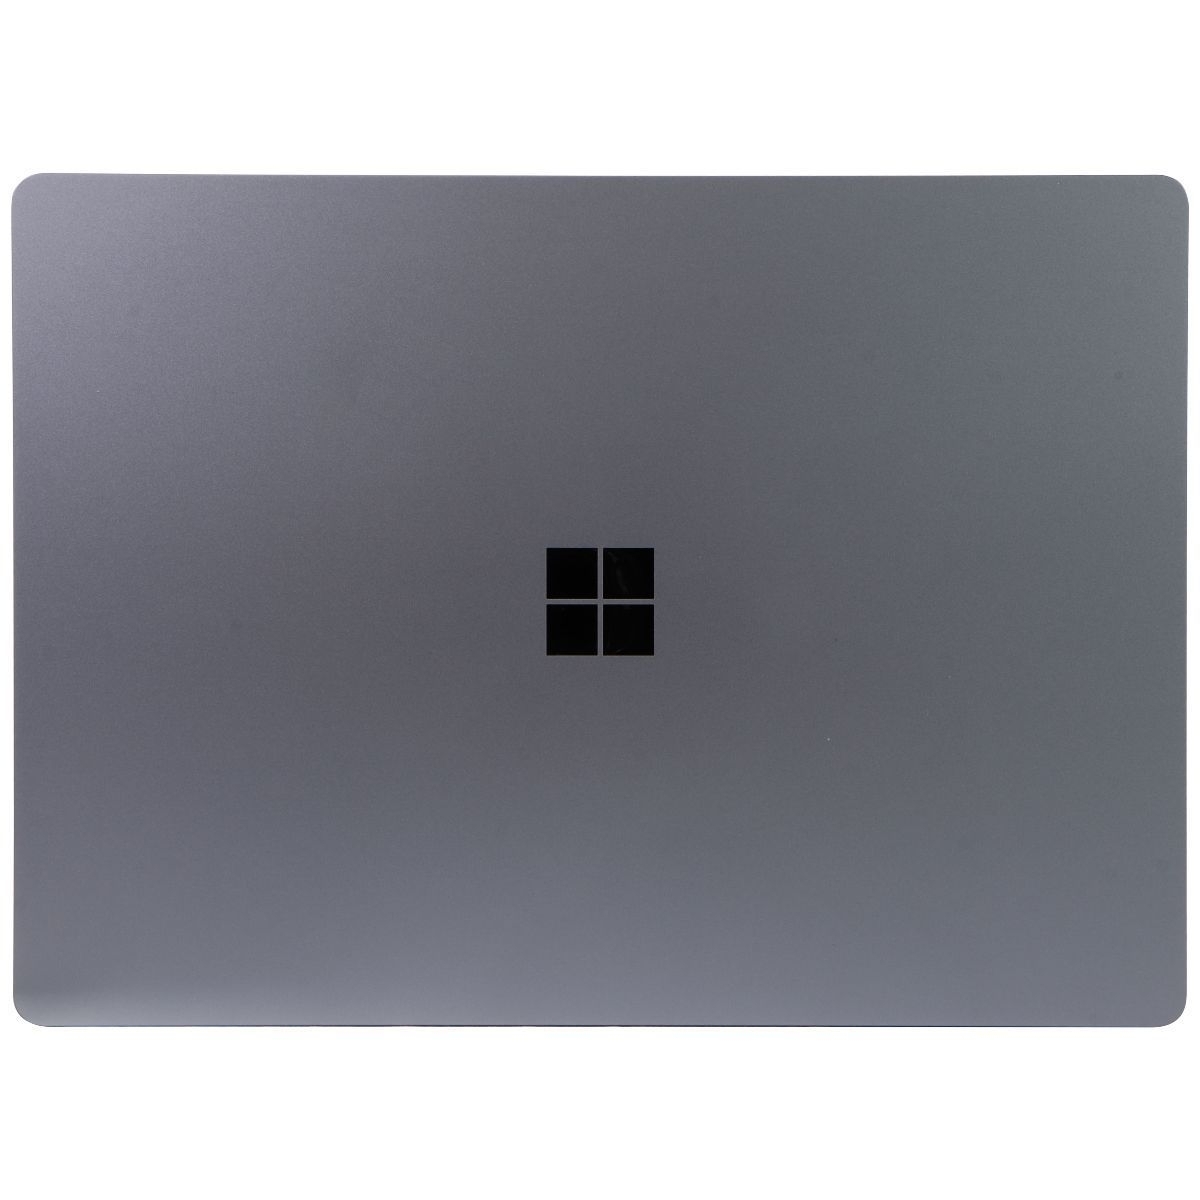 Microsoft Surface Laptop 4 (13.5-in) I5-1135G7 / 512GB SSD / 8GB - Ice Blue